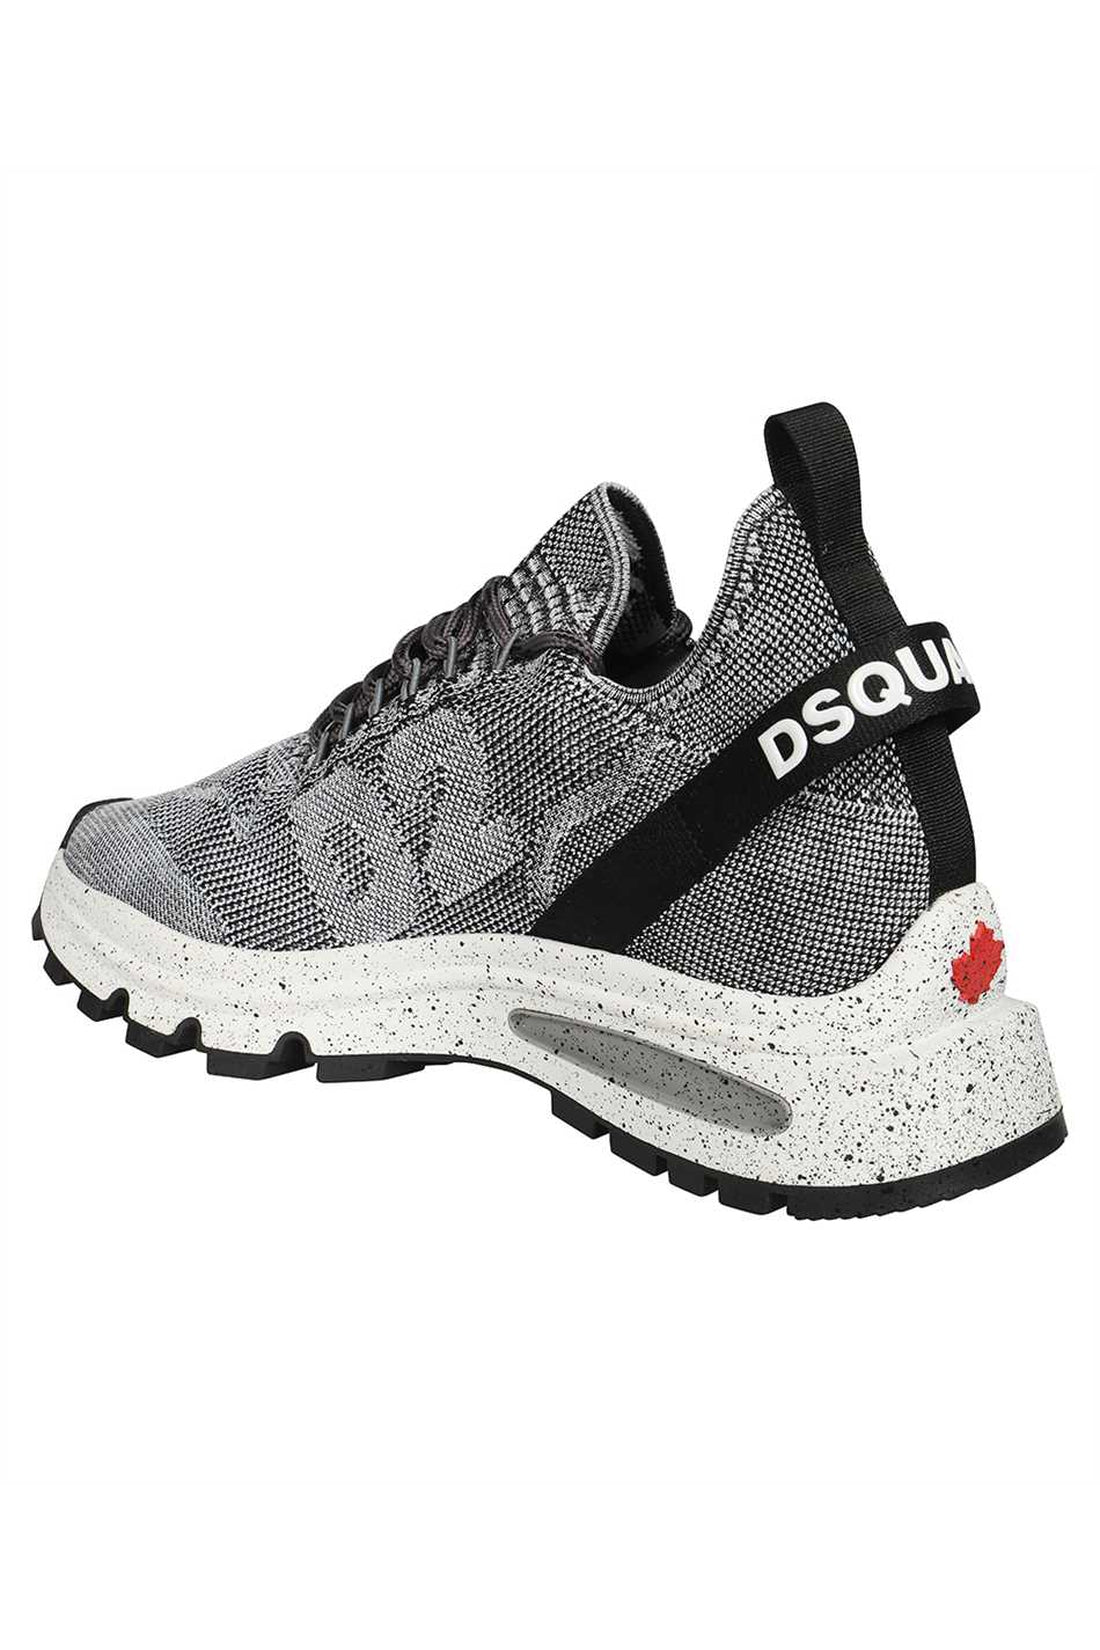 Dsquared2-OUTLET-SALE-Run DS2 low-top sneakers-ARCHIVIST